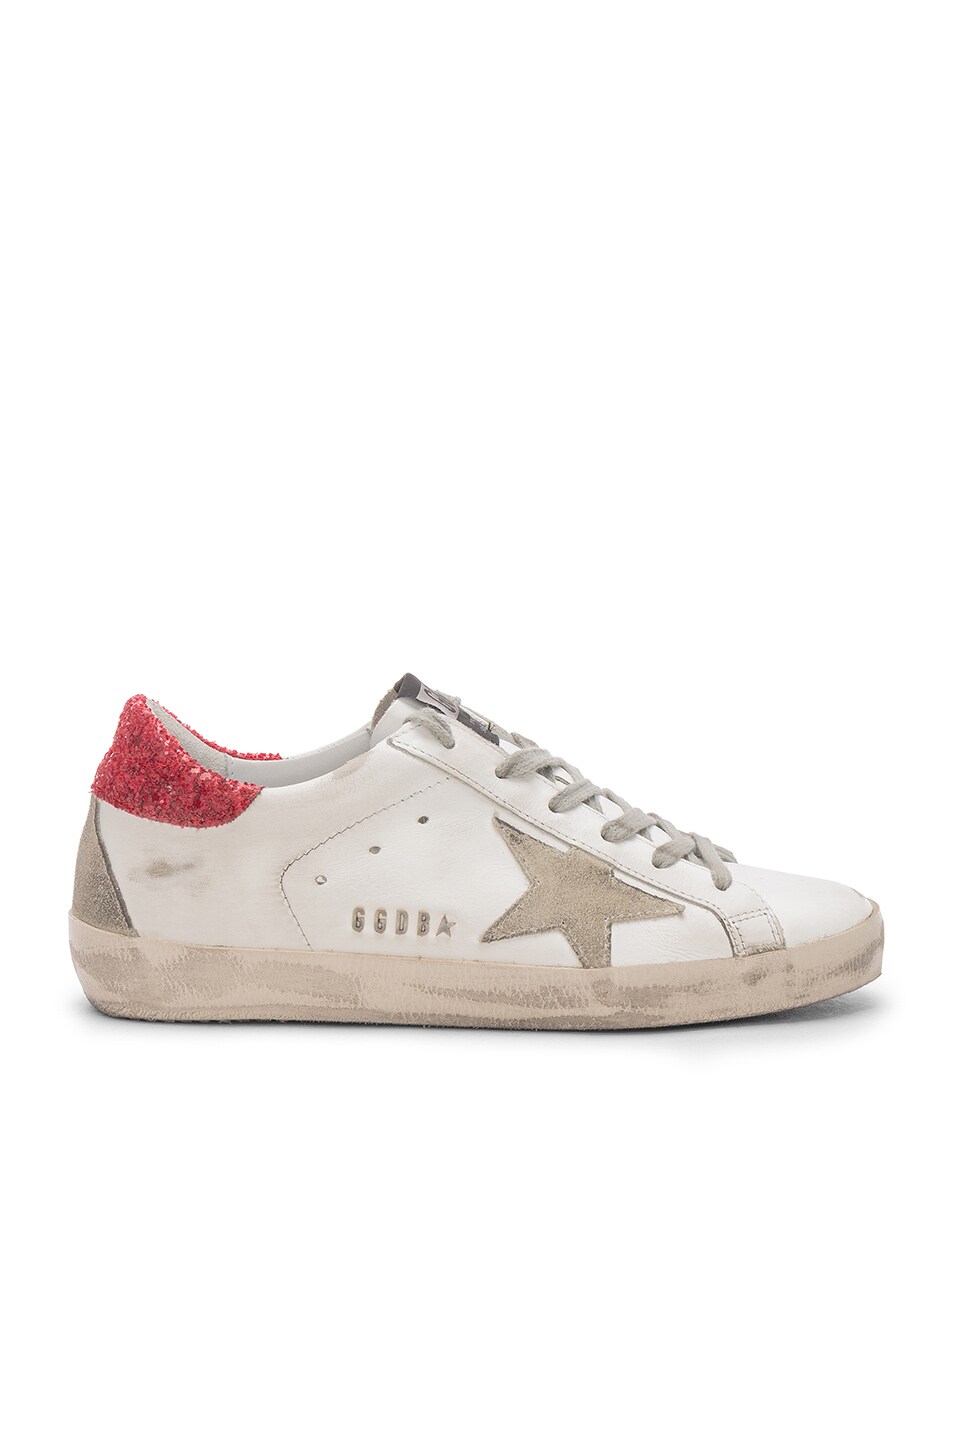 Image 1 of Golden Goose Superstar Sneakers in White Red Glitter & Metal Lettering